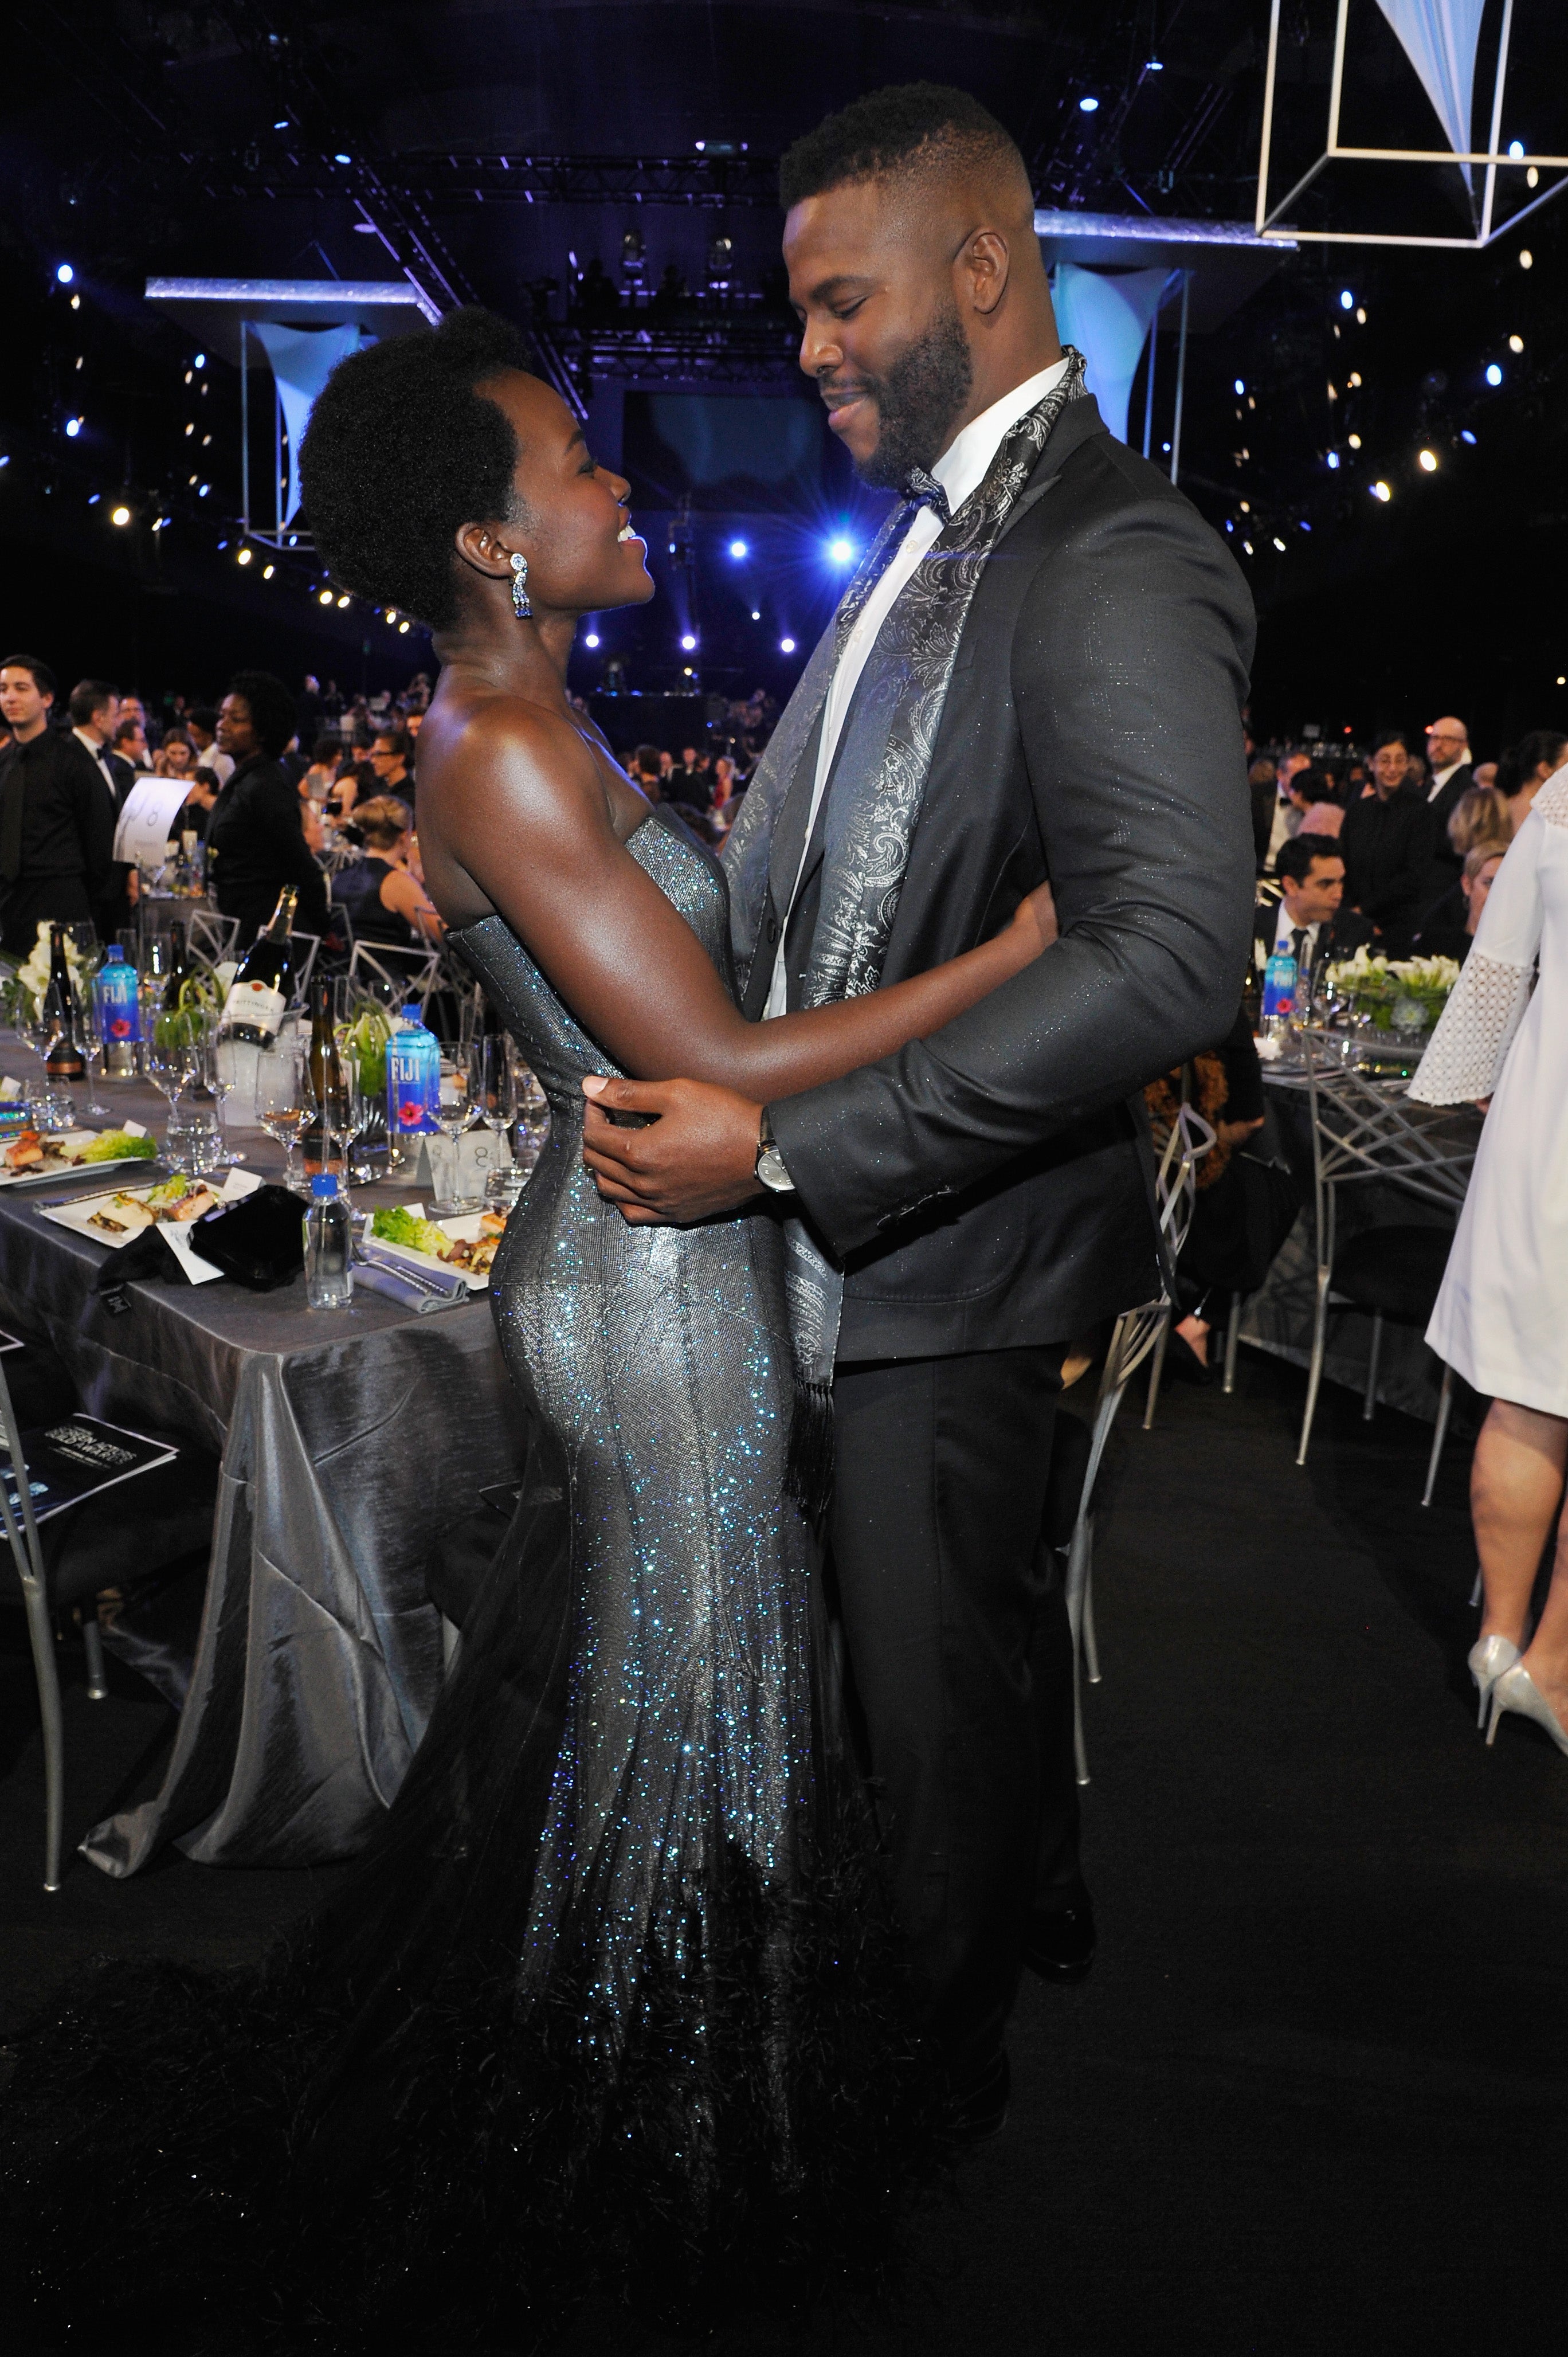 We Want Whatever Lupita Nyong'o Has To Make All Of Her 'Black Panther' Castmates Fall In Love
